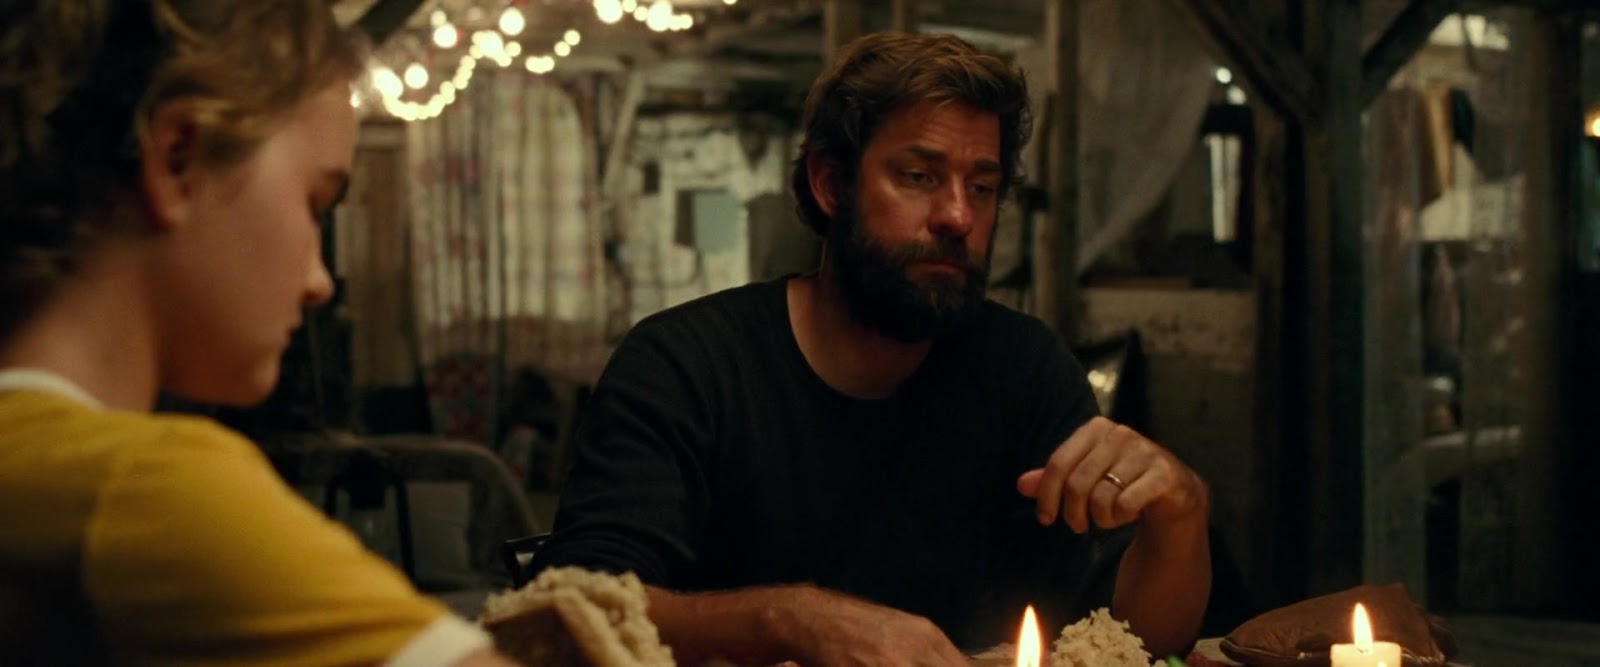 A quiet place full movie download in hindi filmyzilla